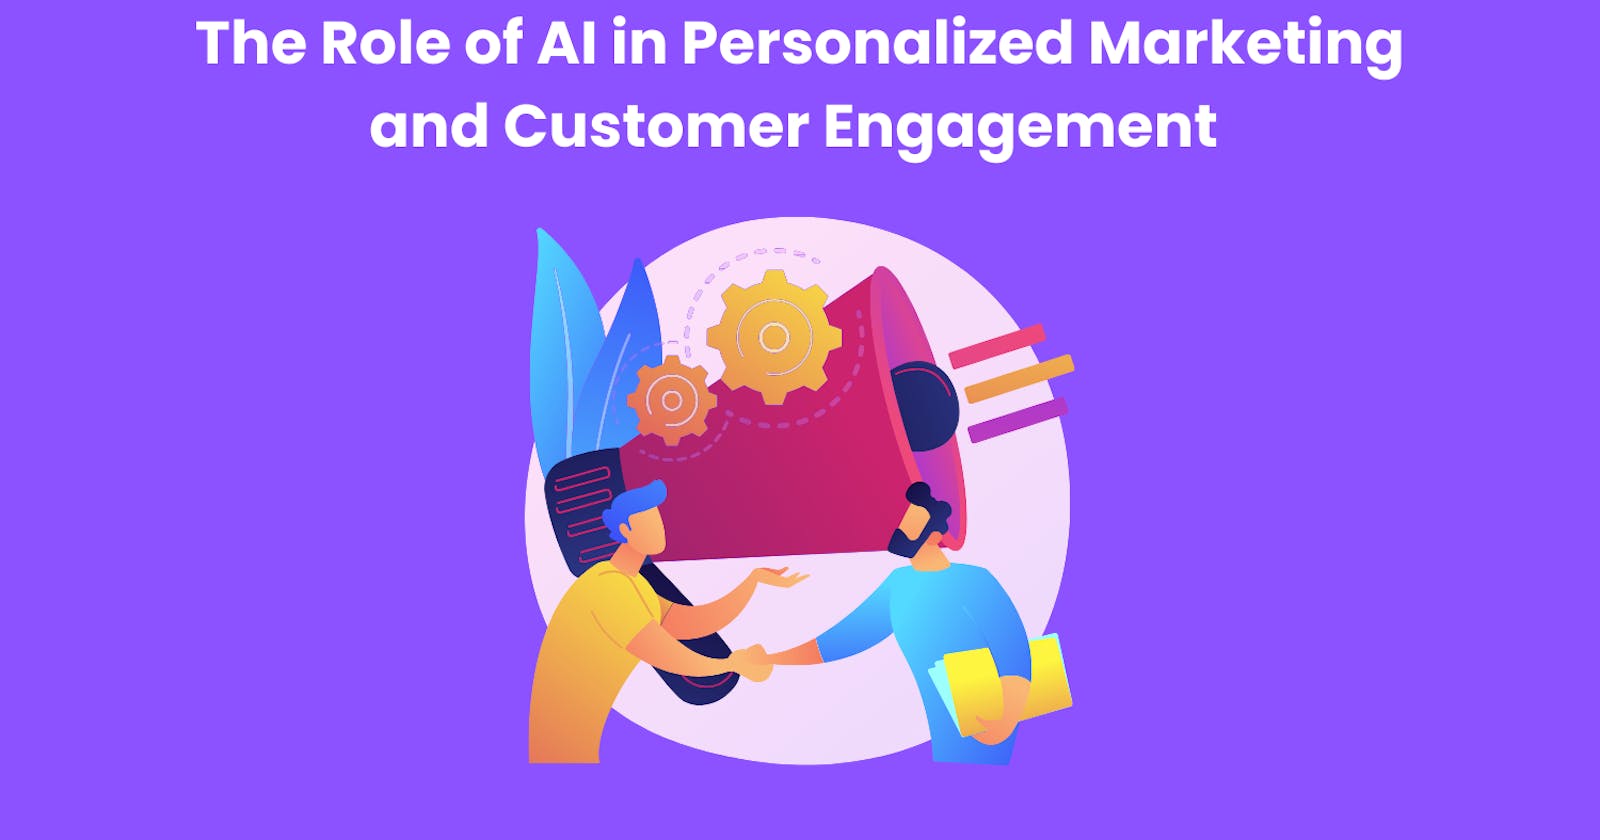 The Role of AI in Personalized Marketing and Customer Engagement